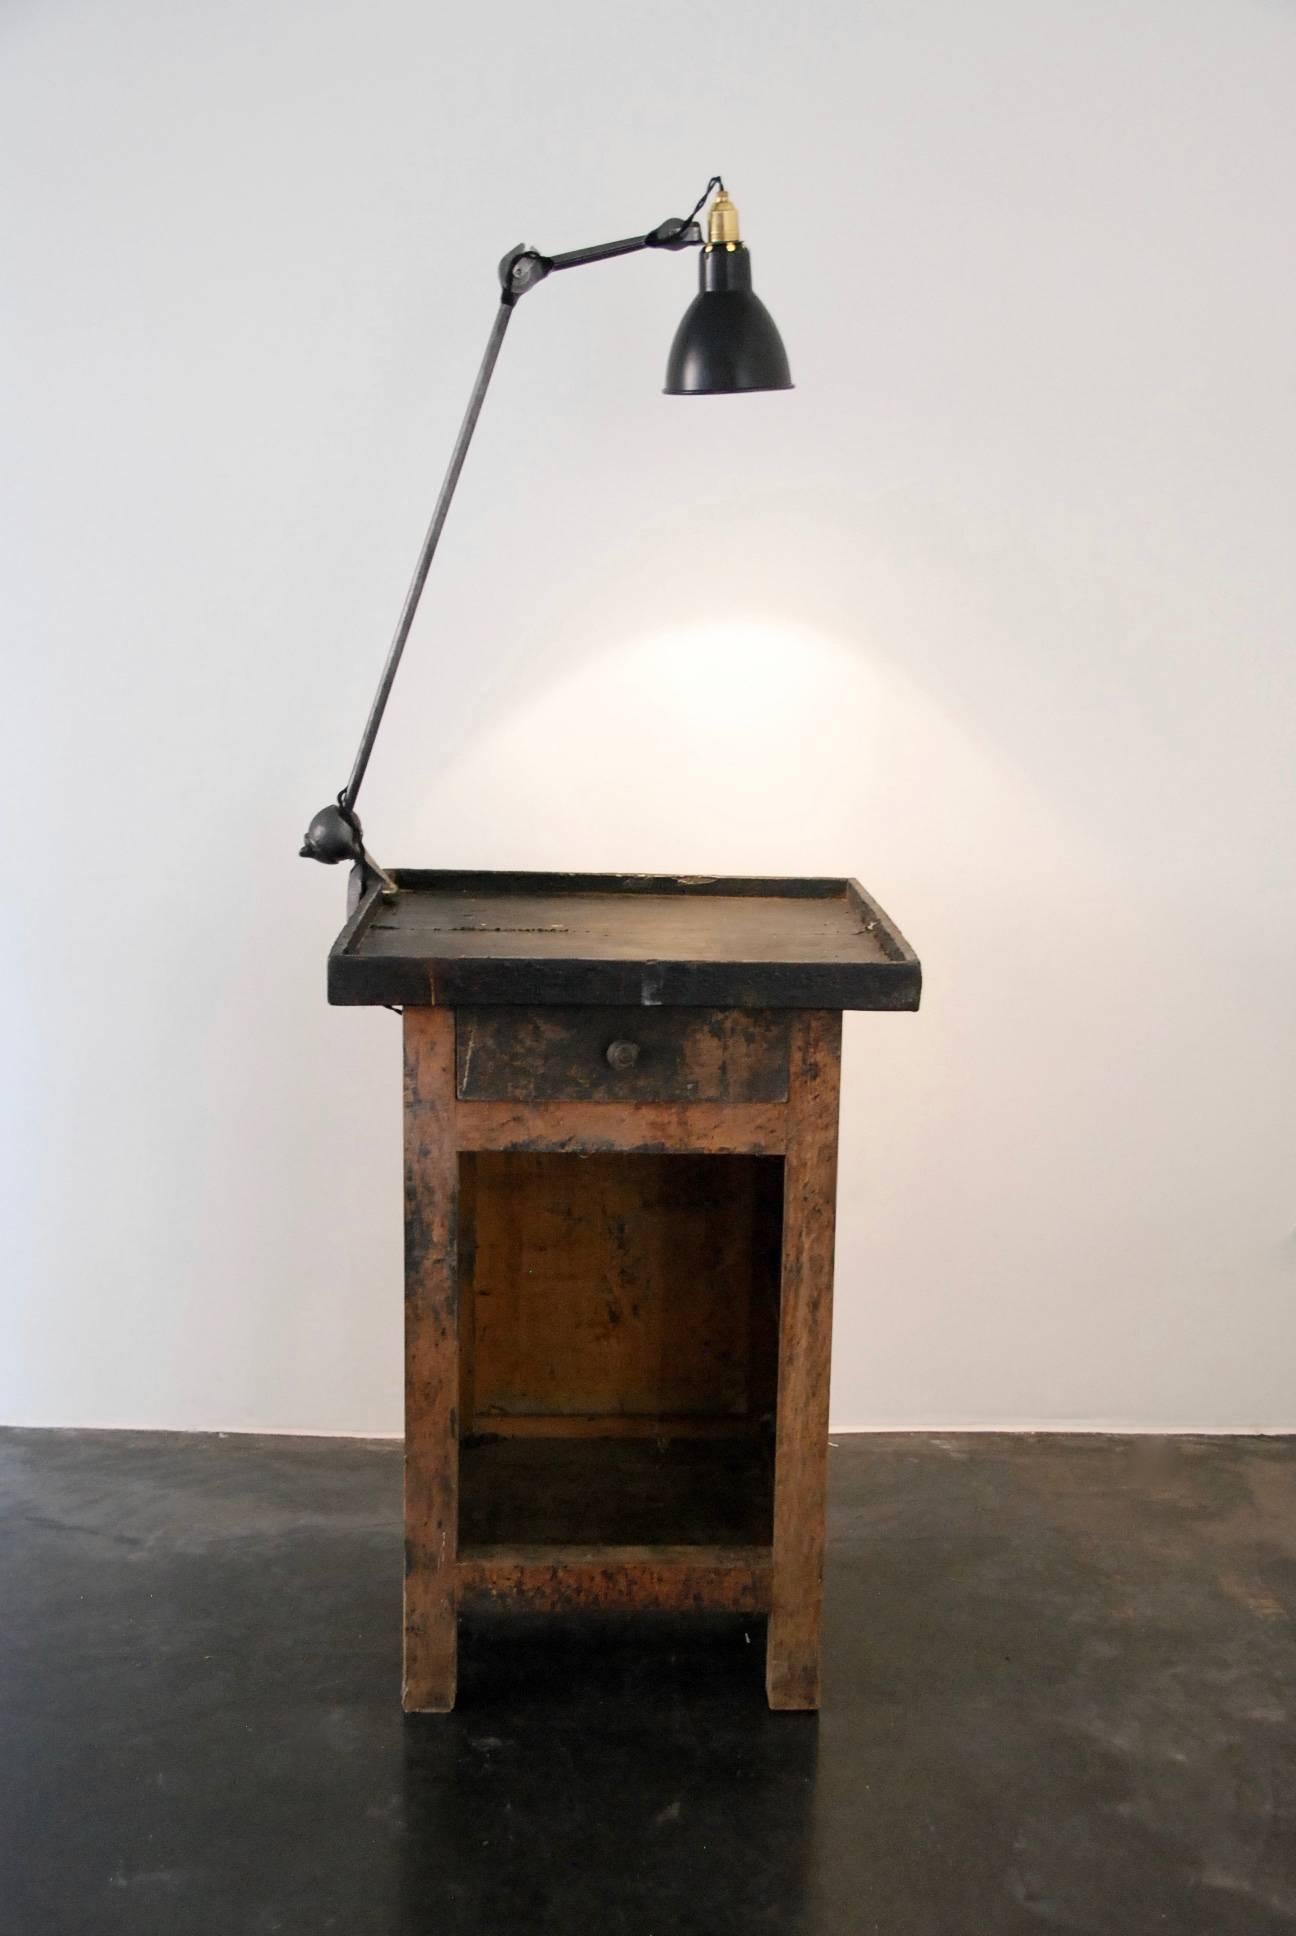 Industrial table lamp nr 201 designed by Bernard-Albin Gras. Manufactured by Gras (France) circa 1930. Aluminium and steel. In good original condition, with minor wear consistent with age and use, preserving a beautiful patina.